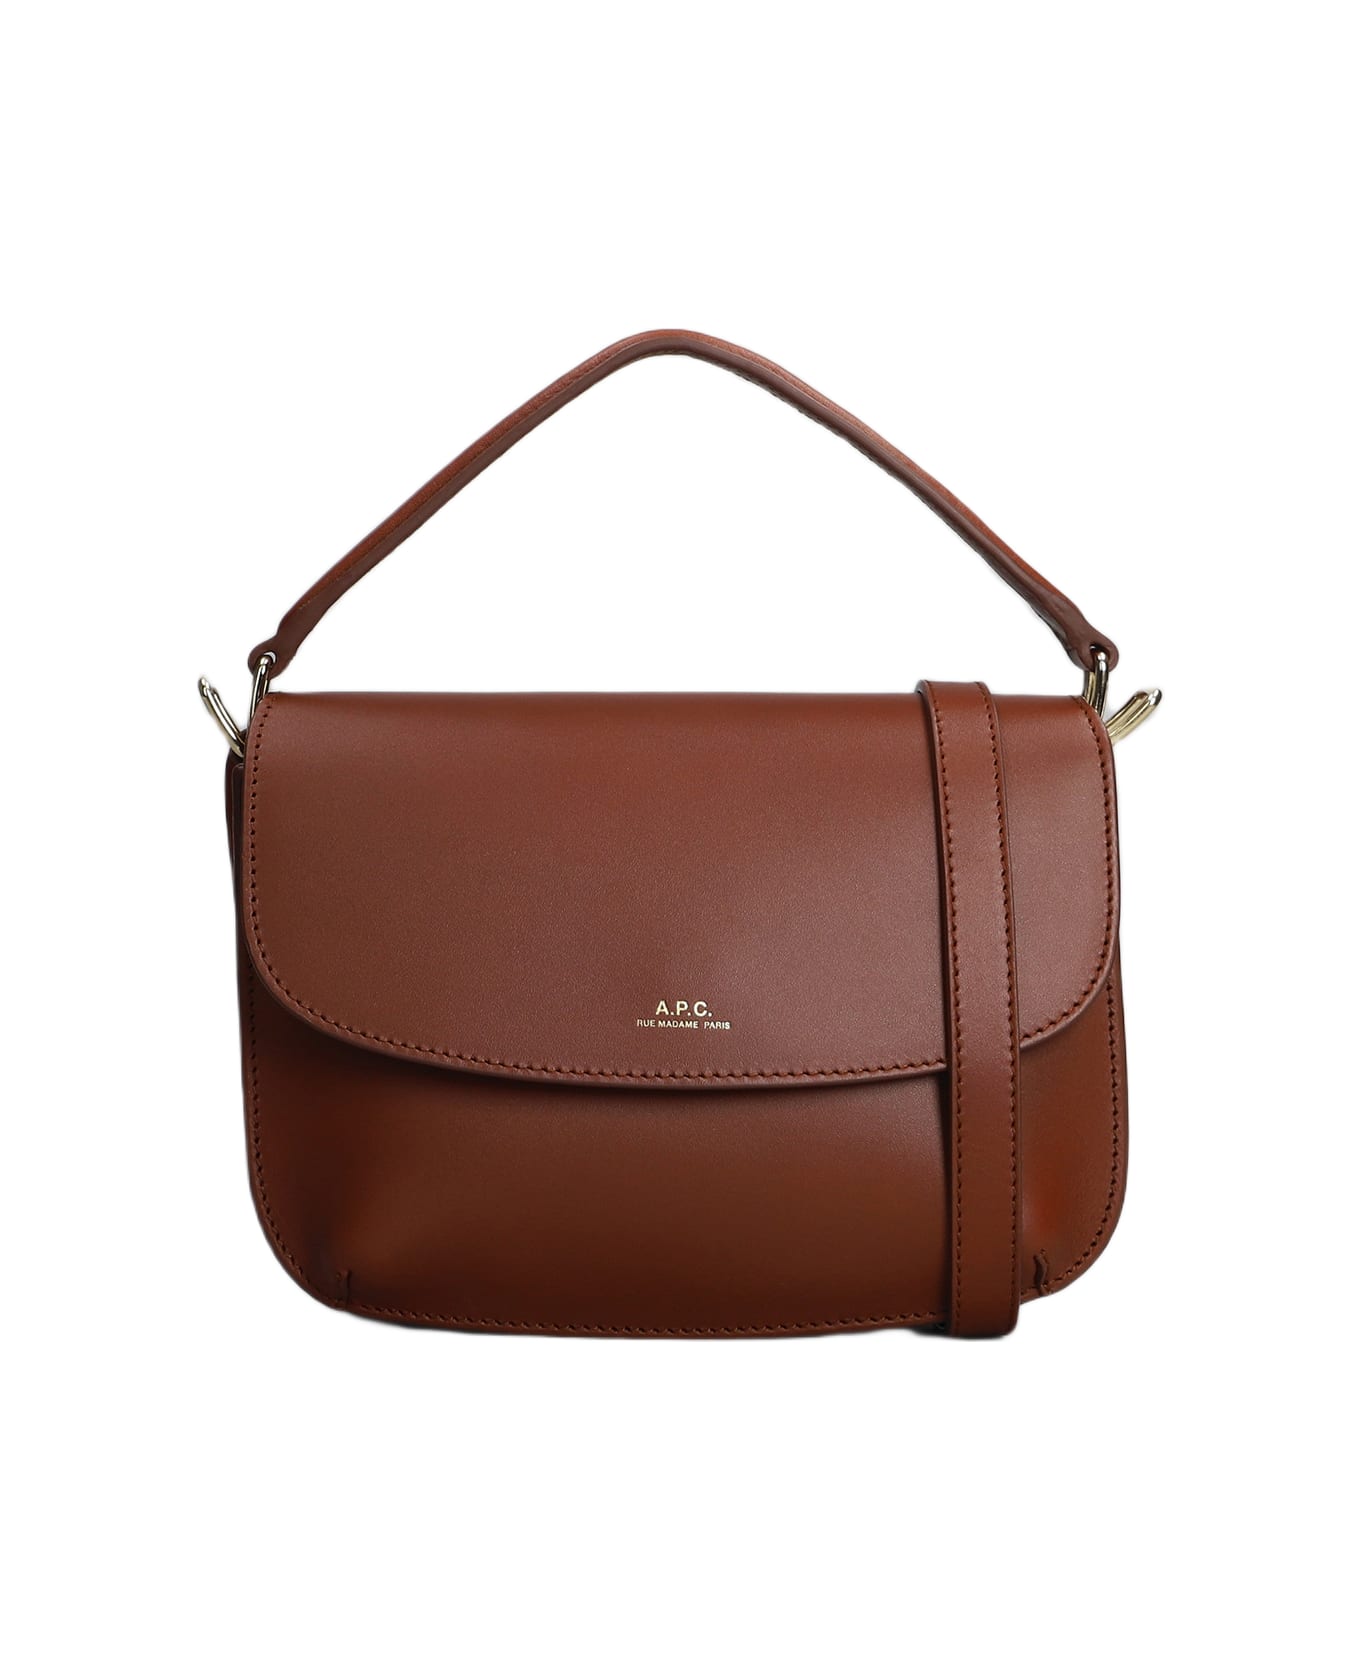 A.P.C. Sarah Hand Bag In Leather Color Leather - Cad Hazelnut